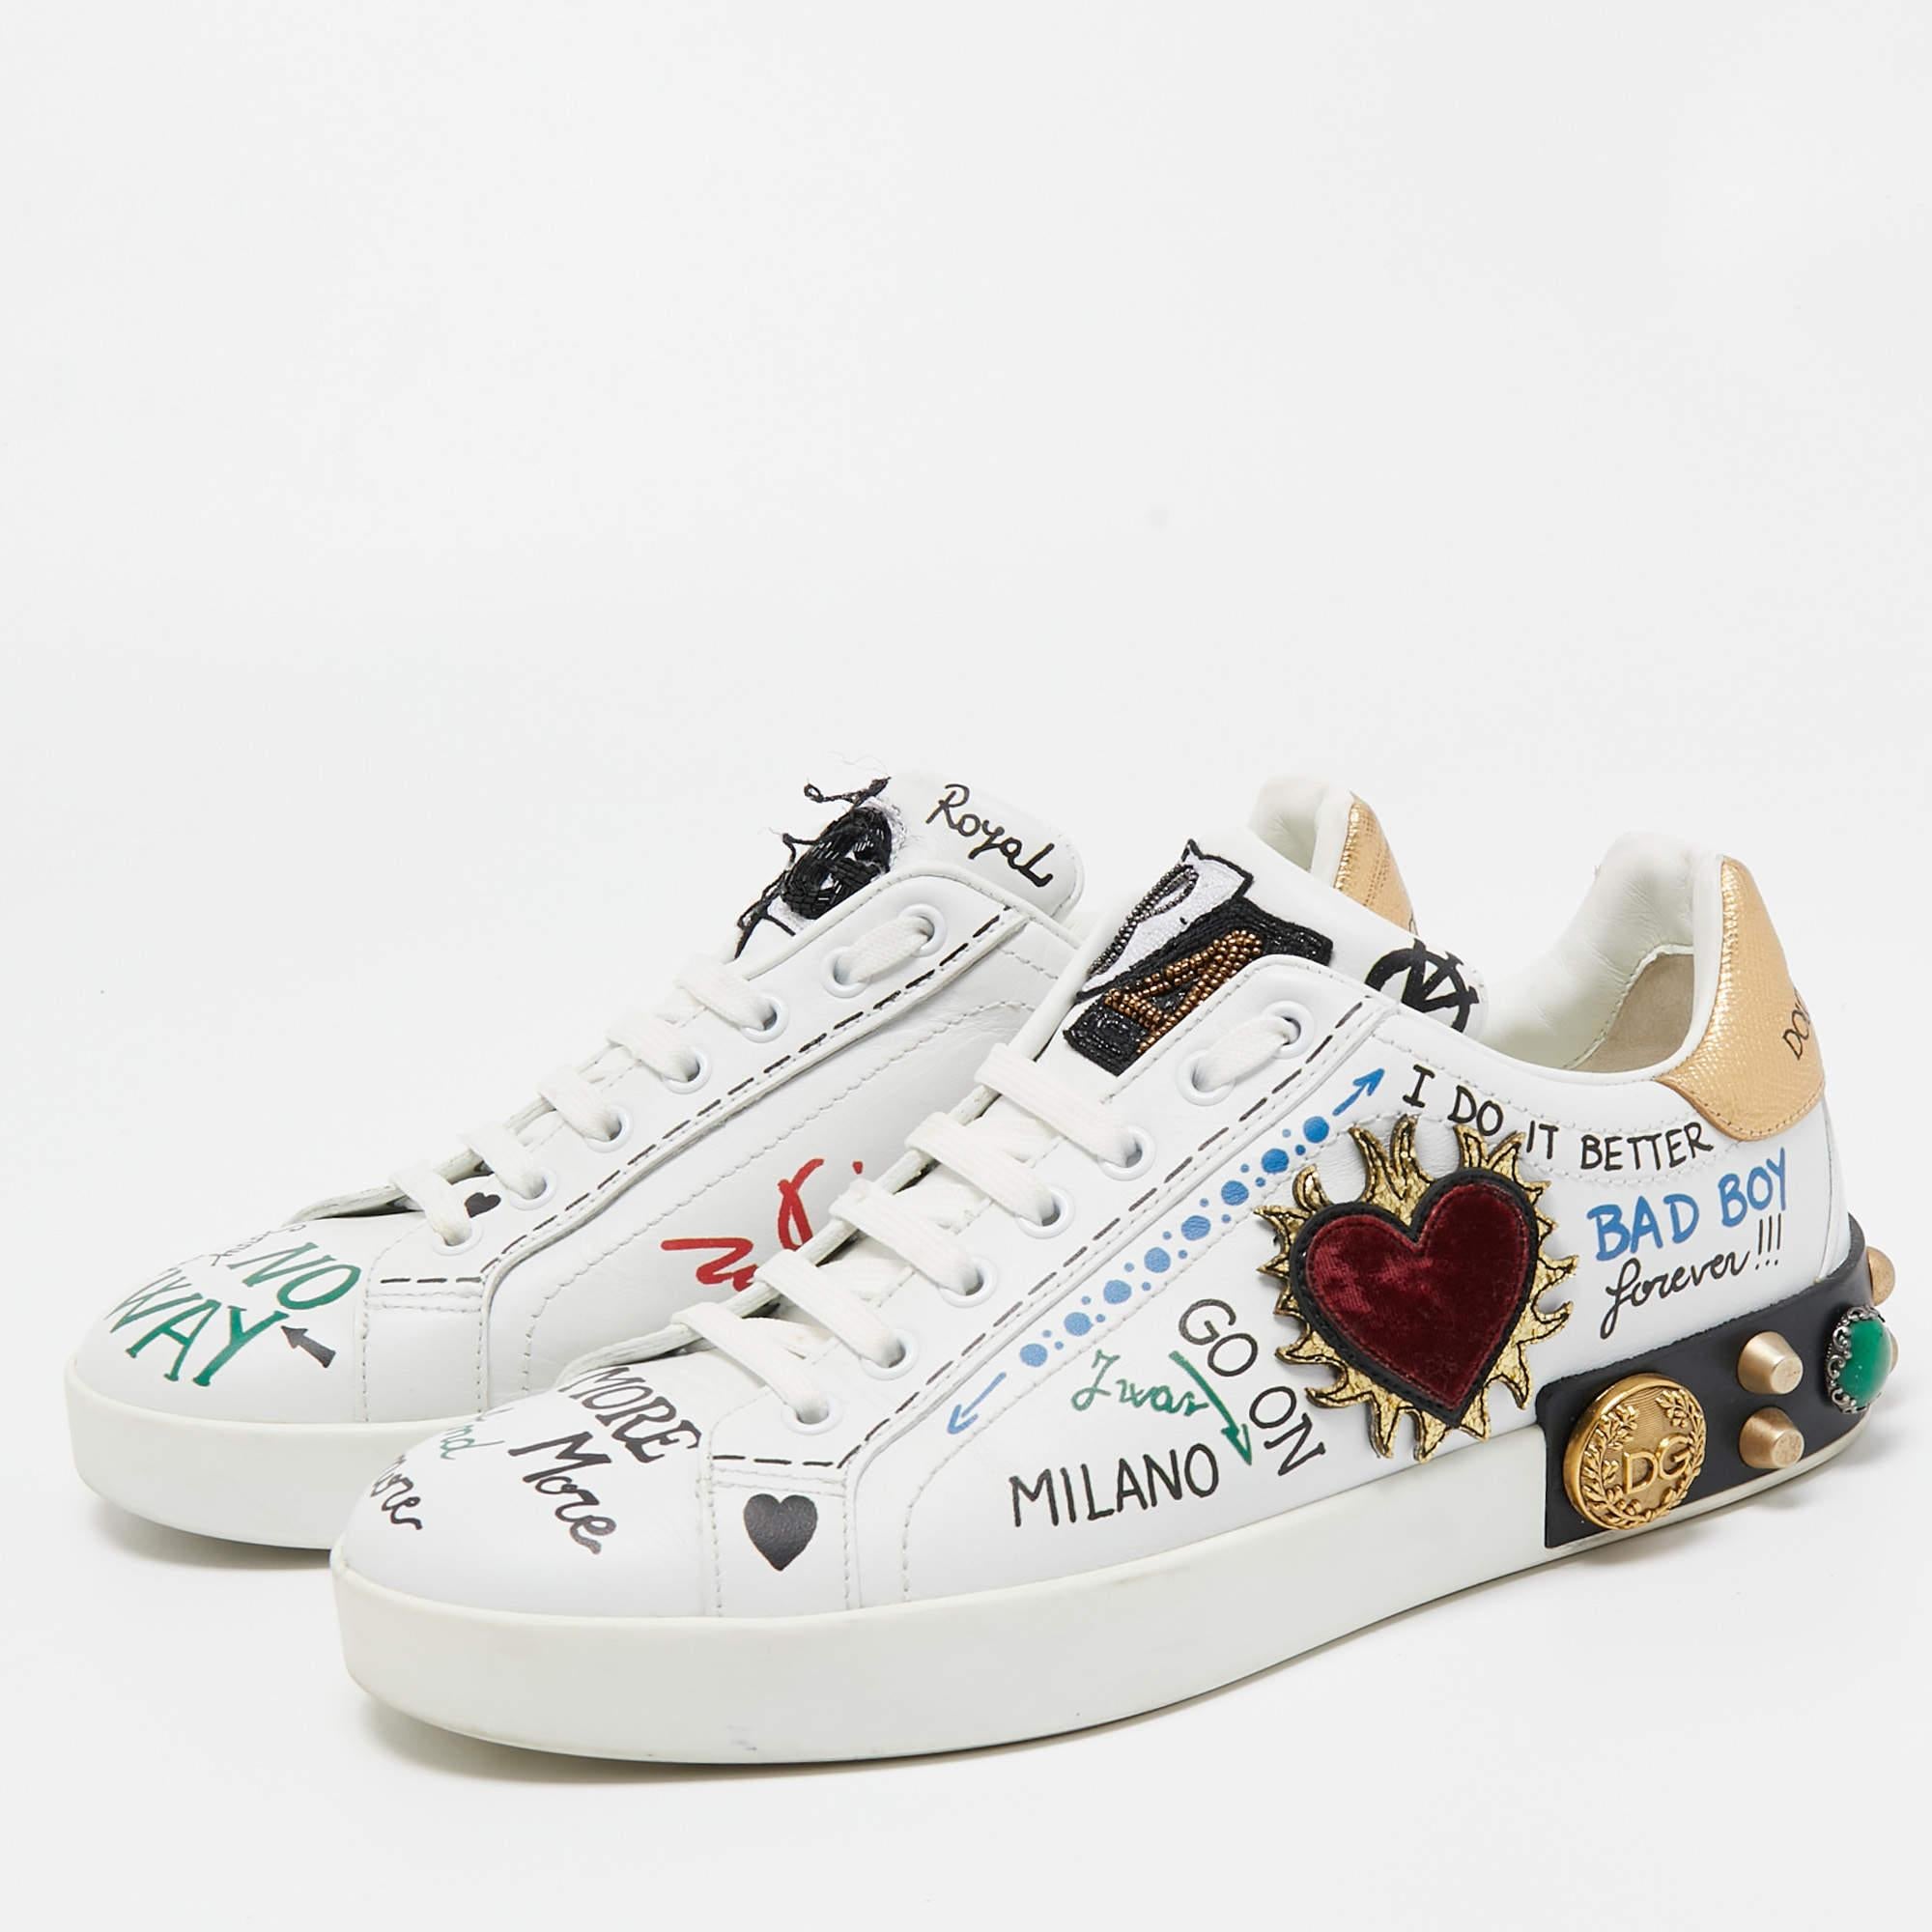 Elevate your footwear game with these Dolce & Gabbana white sneakers. Combining high-end aesthetics and unmatched comfort, these sneakers are a symbol of modern luxury and impeccable taste.

